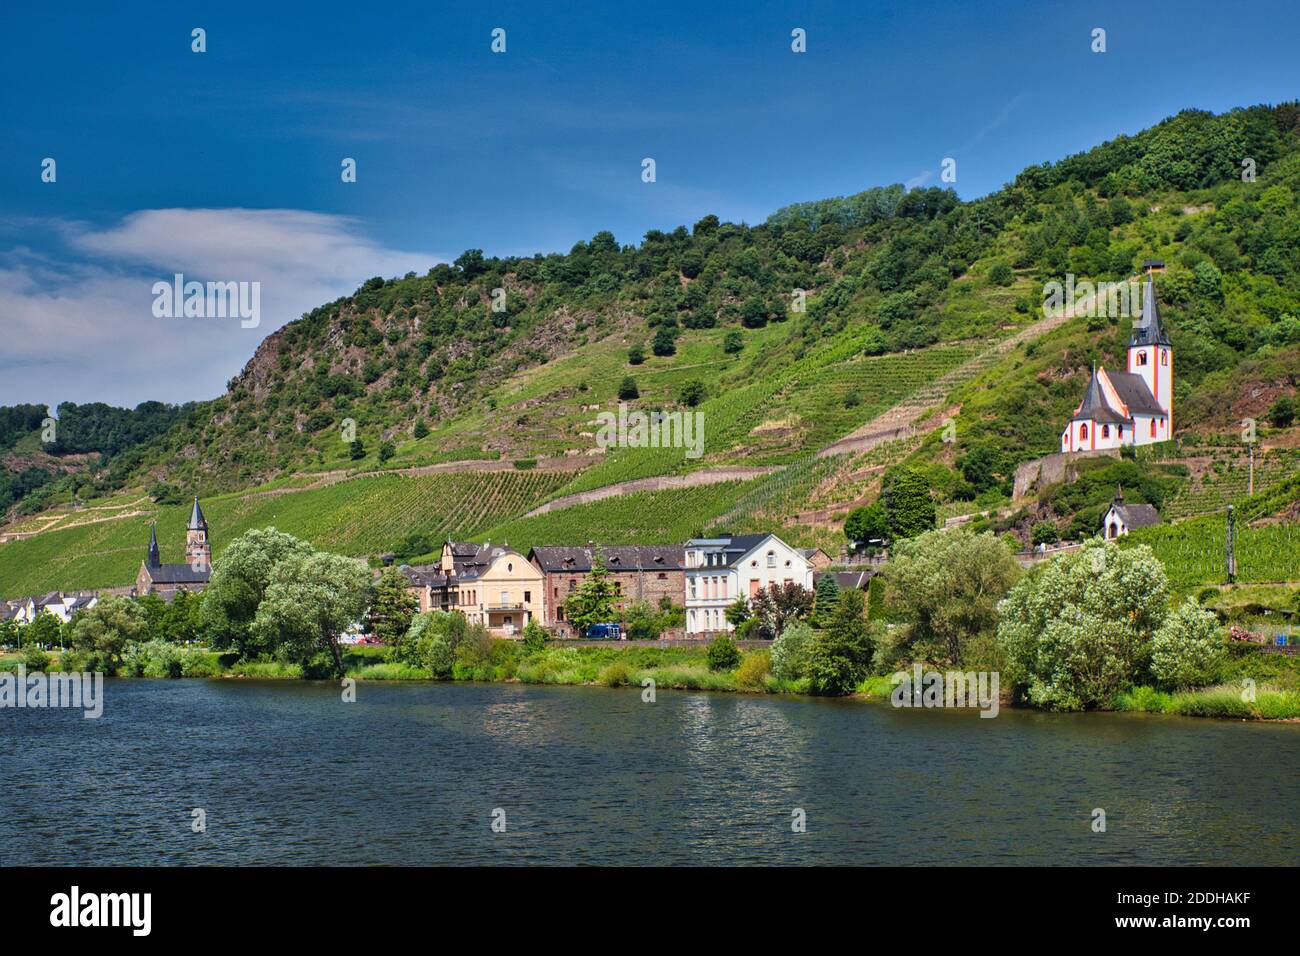 A pretty scene on the River Rhine in Germany with houses, buildings and Church on the hillside above the village. Stock Photo